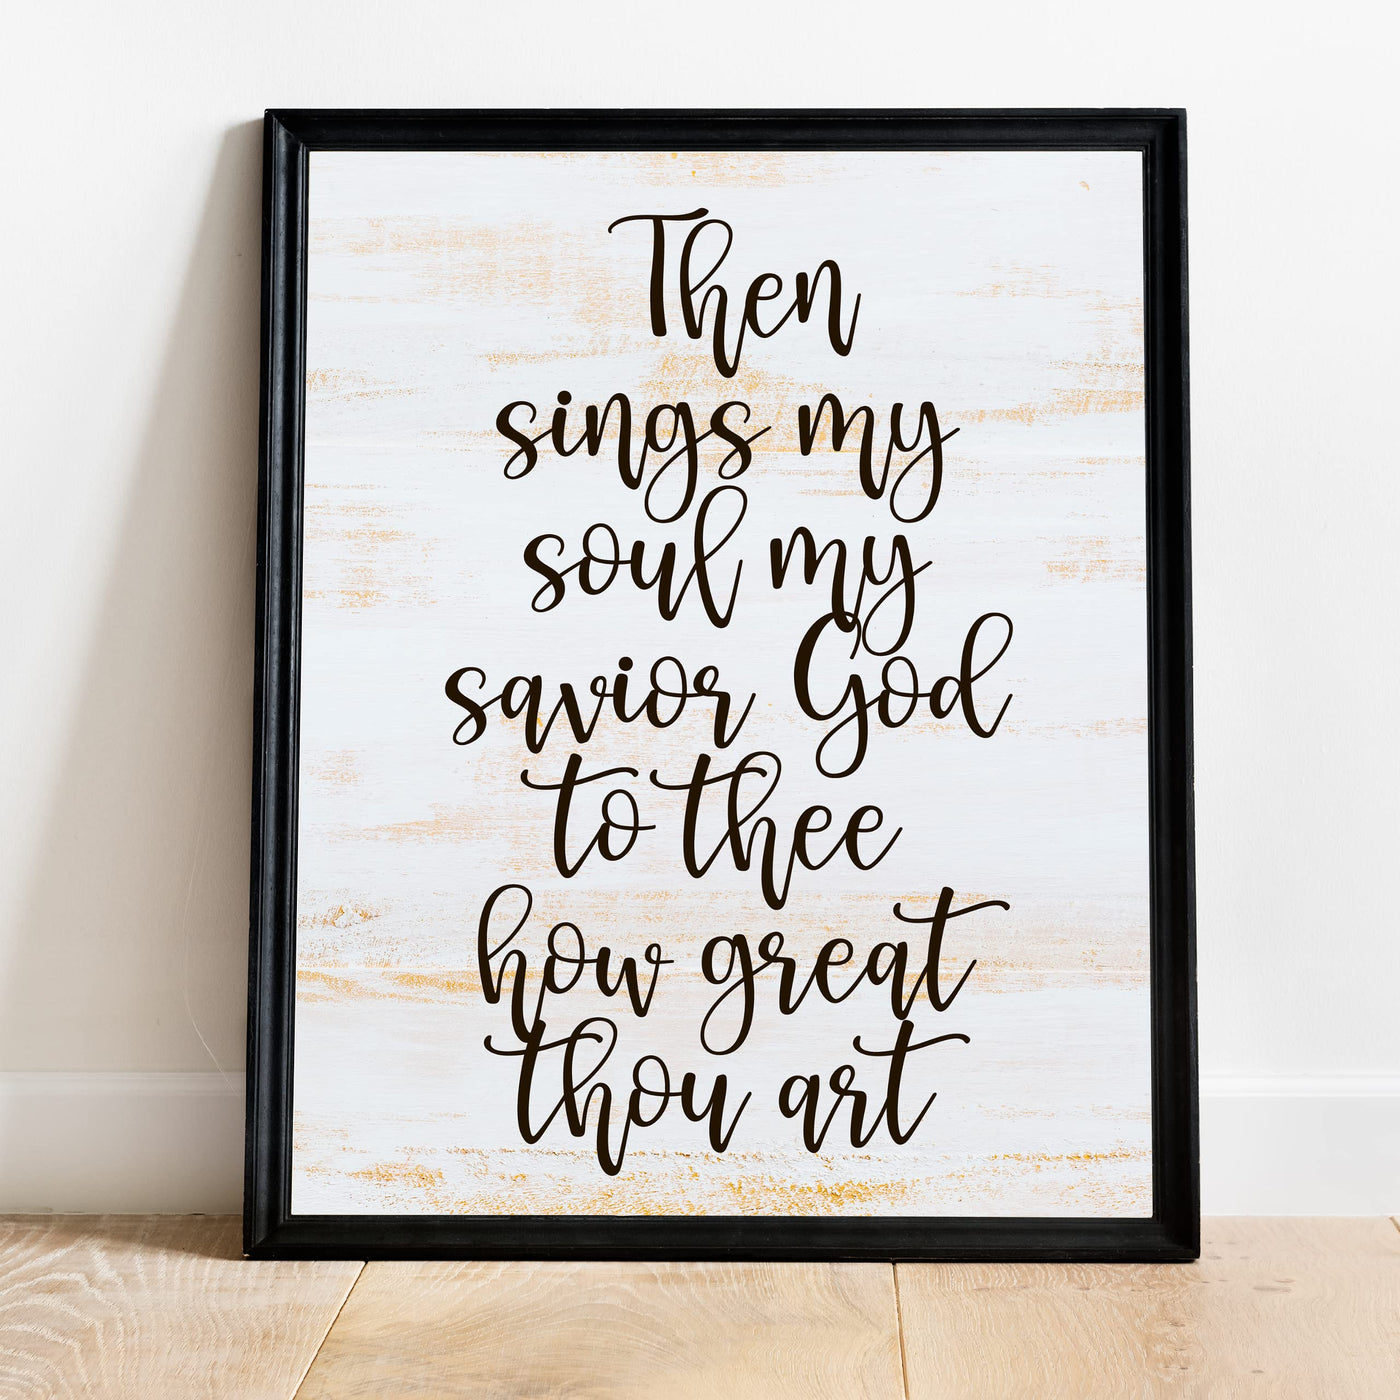 Then Sings My Soul, My Savior God to Thee Song Lyrics Wall Art-11 x 14" Christian Worship Music Print -Ready to Frame. Inspirational Farmhouse Decor for Home-Office-Church. Great Religious Gift!